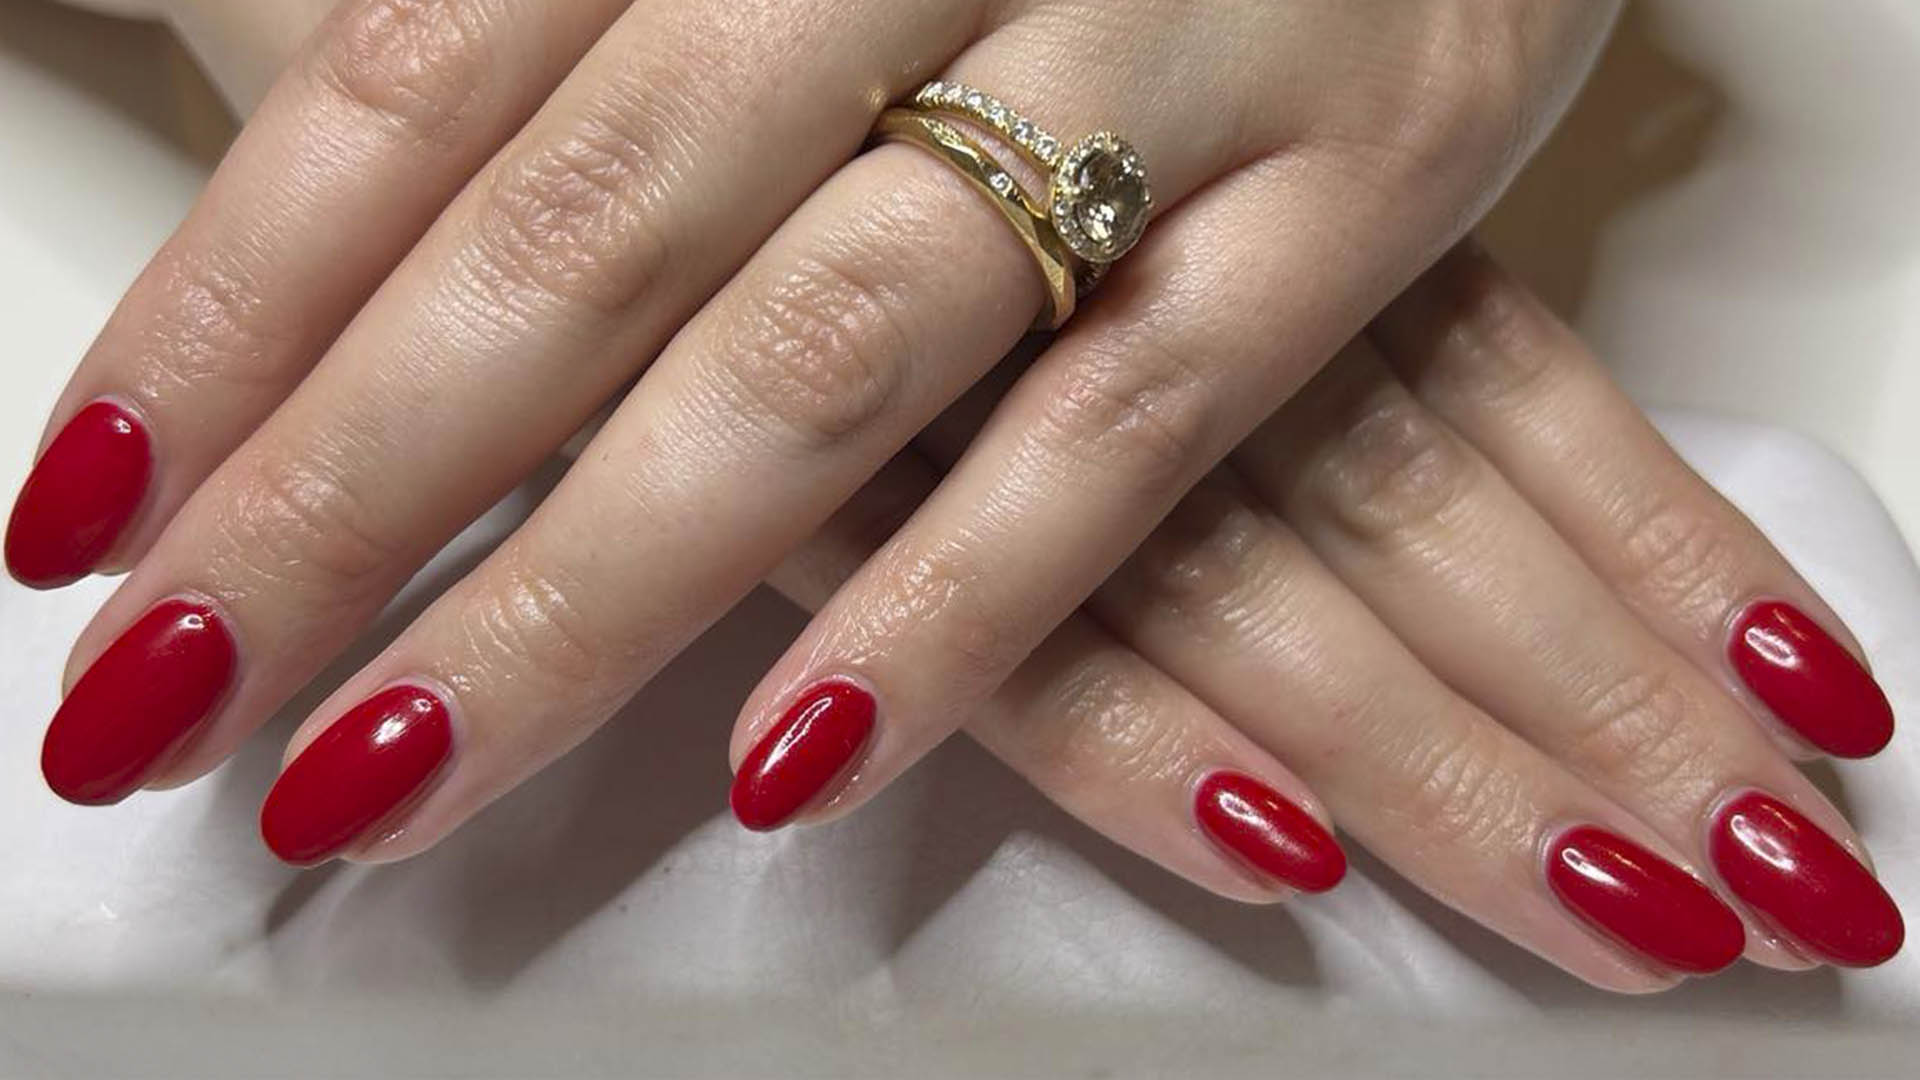 TakeAlook_manicure_red01